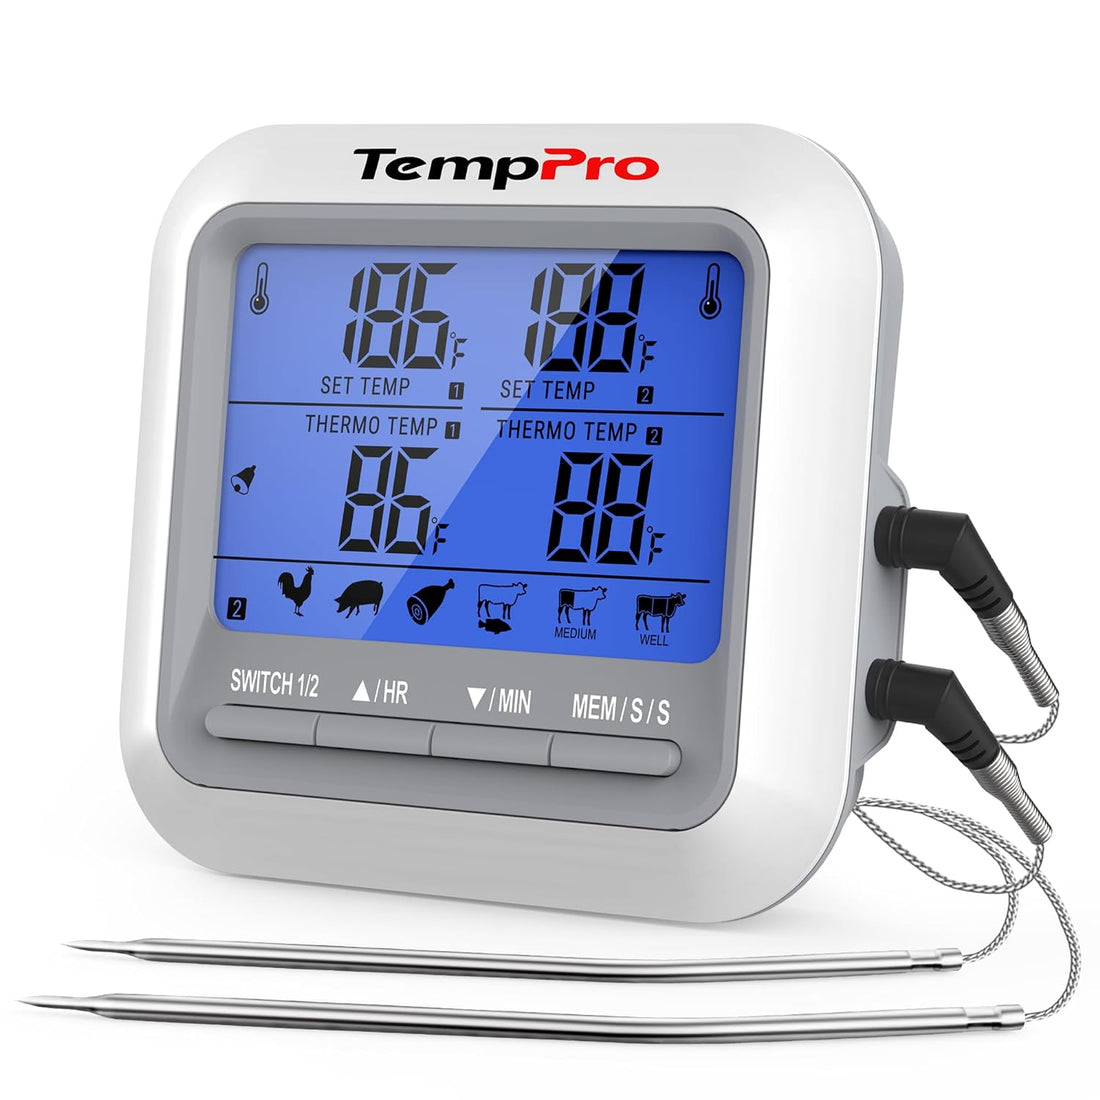 TempPro G17 Digital Meat Thermometer Dual Probes Food Thermometer for Oven Smoker Grill Deep Fry Cooking Thermometer with Backlit Oven Thermometer with Timer, White